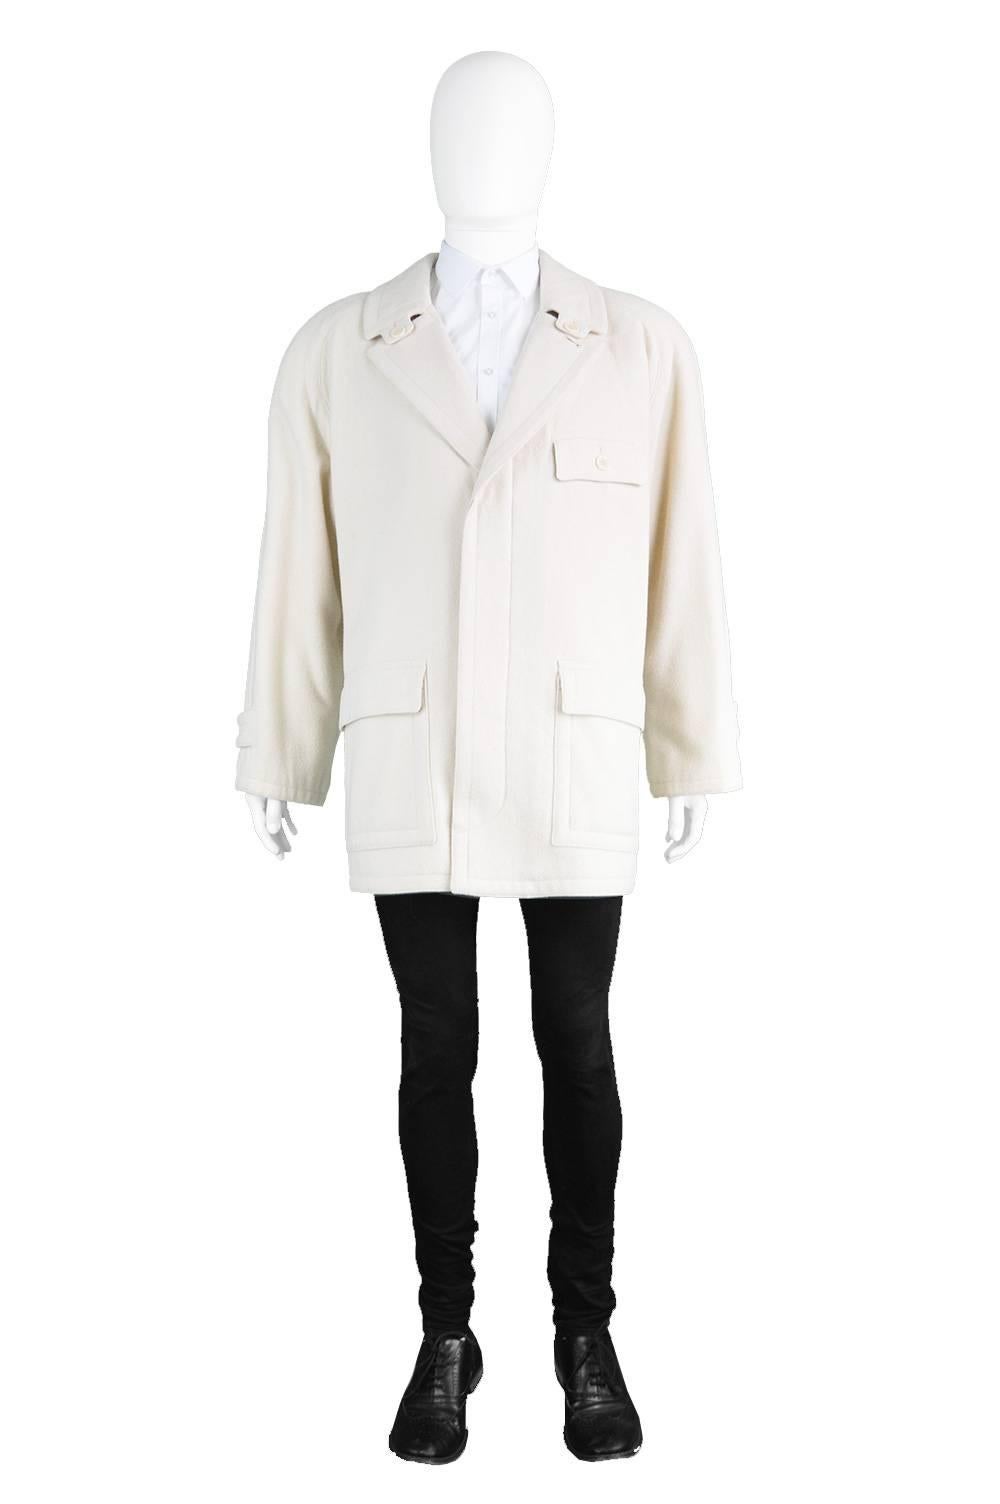 A timeless vintage wool coat from the 1980s by luxury French designer and couturier, Louis Féraud for his rare 'monsieur' mens line. Made in Italy, in a cream Italian wool, the raglan sleeve, patch pockets and concealed button placket all give the